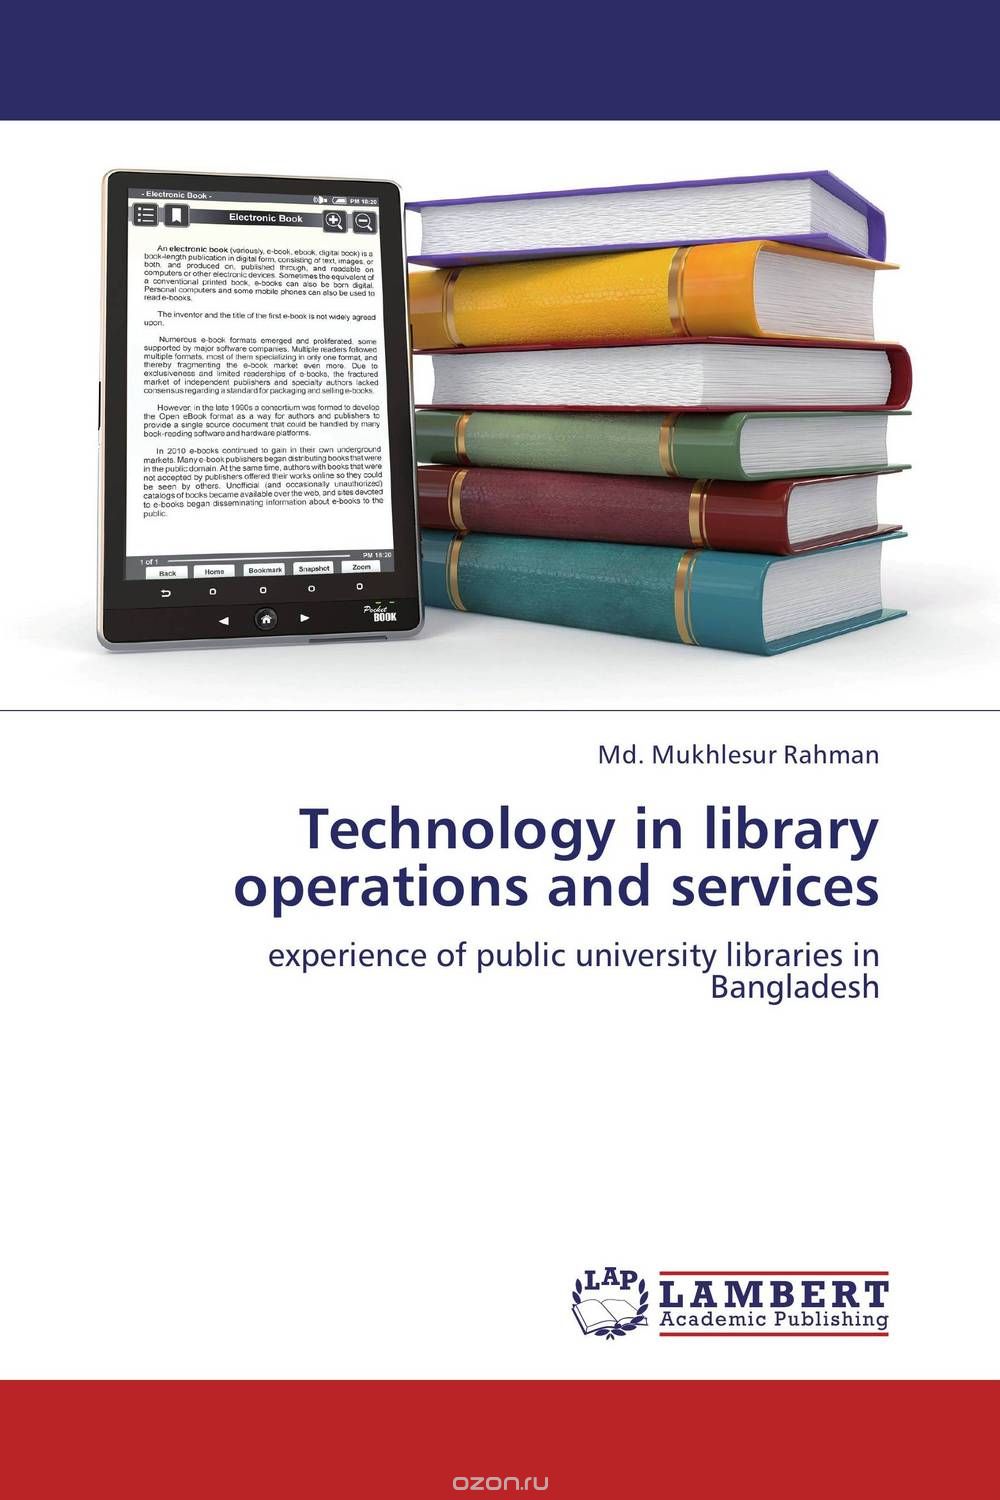 Скачать книгу "Technology in library operations and services"